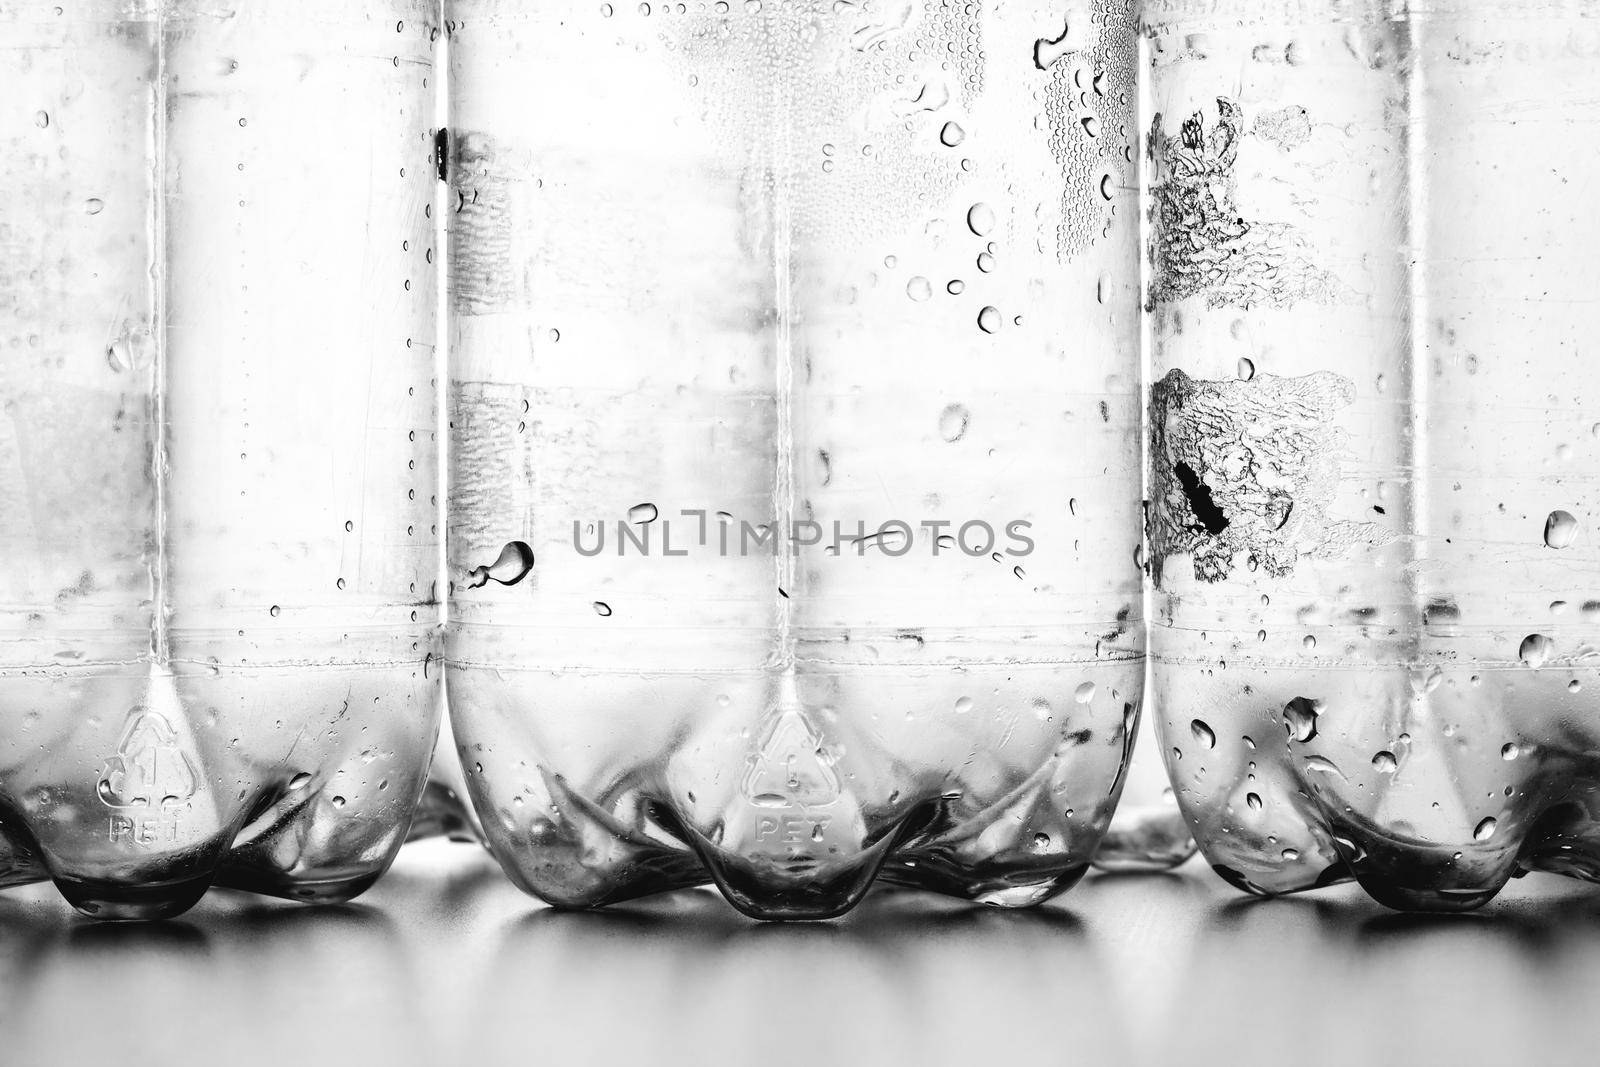 group of empty plastic bottles with condensation droplets